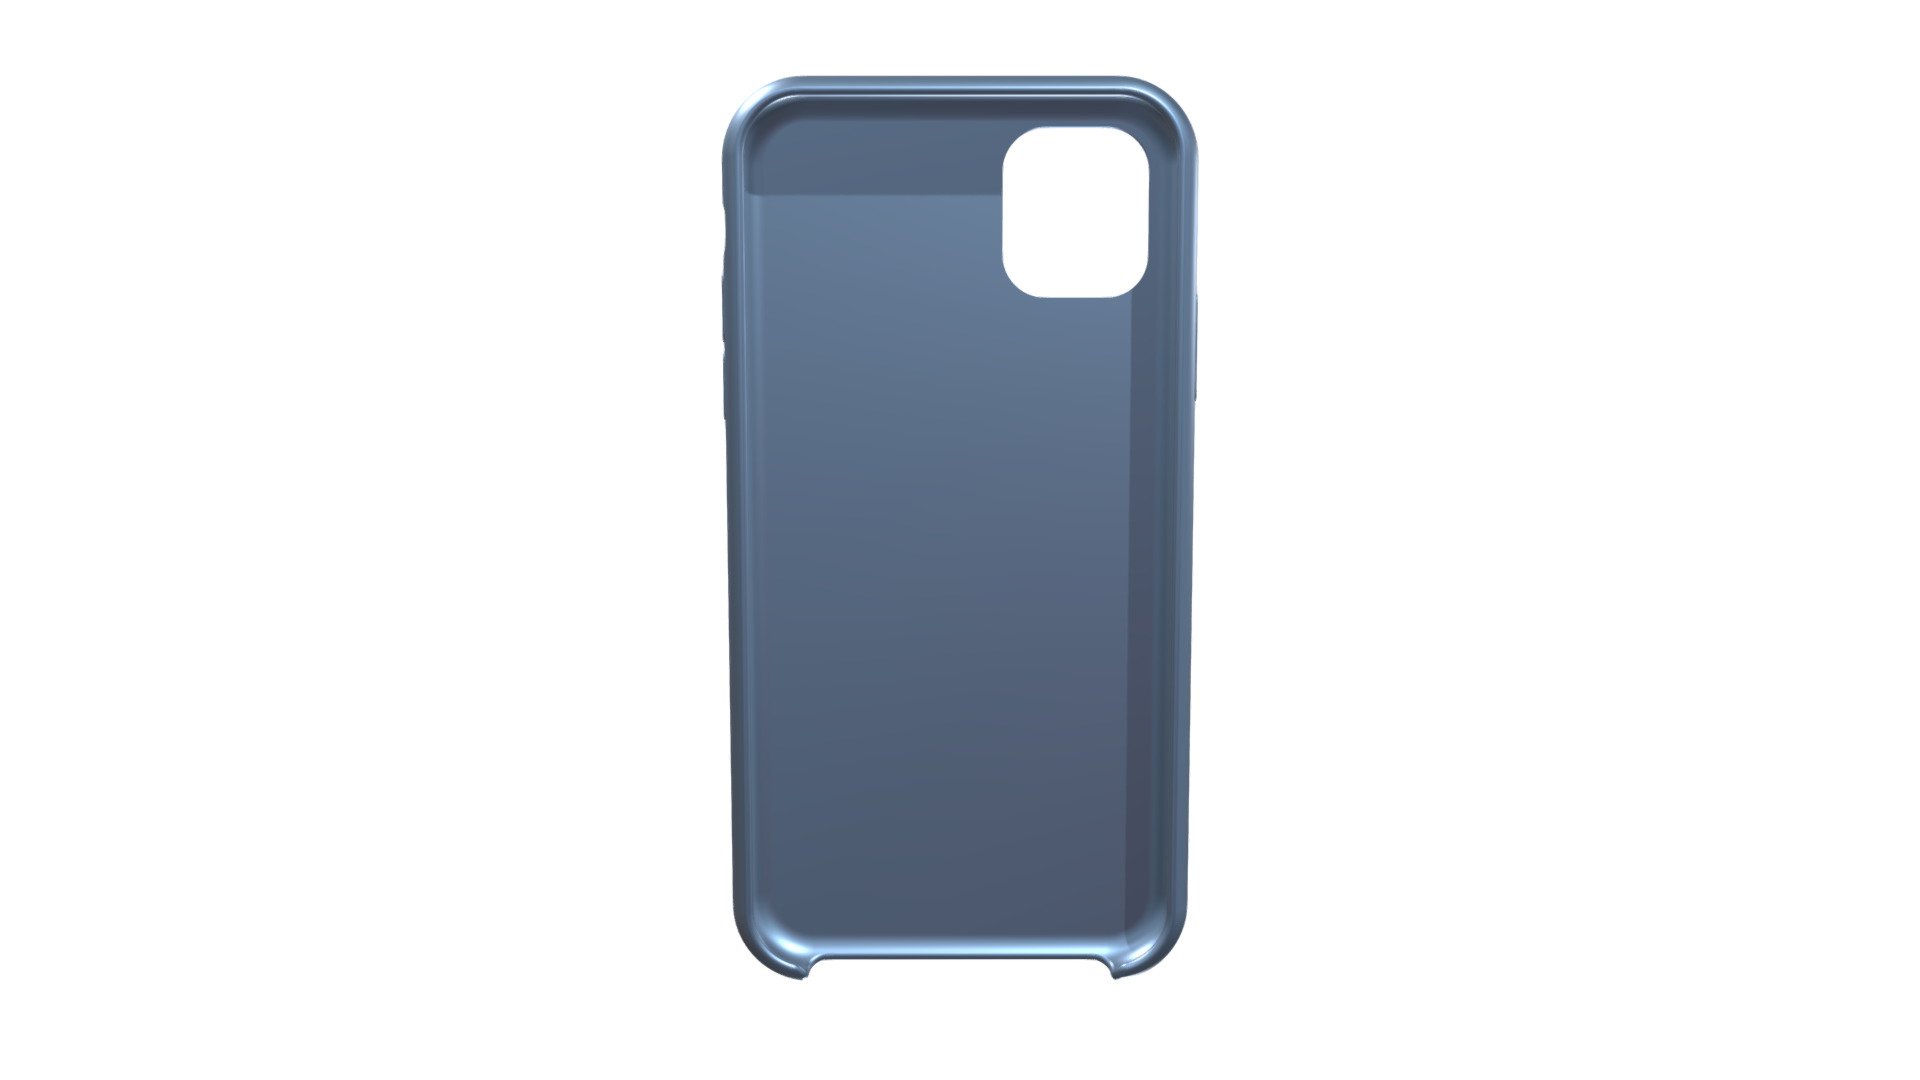 Cad Model Of Iphone 11 Case 3d Model By Scanmotion Marcs F953cf0